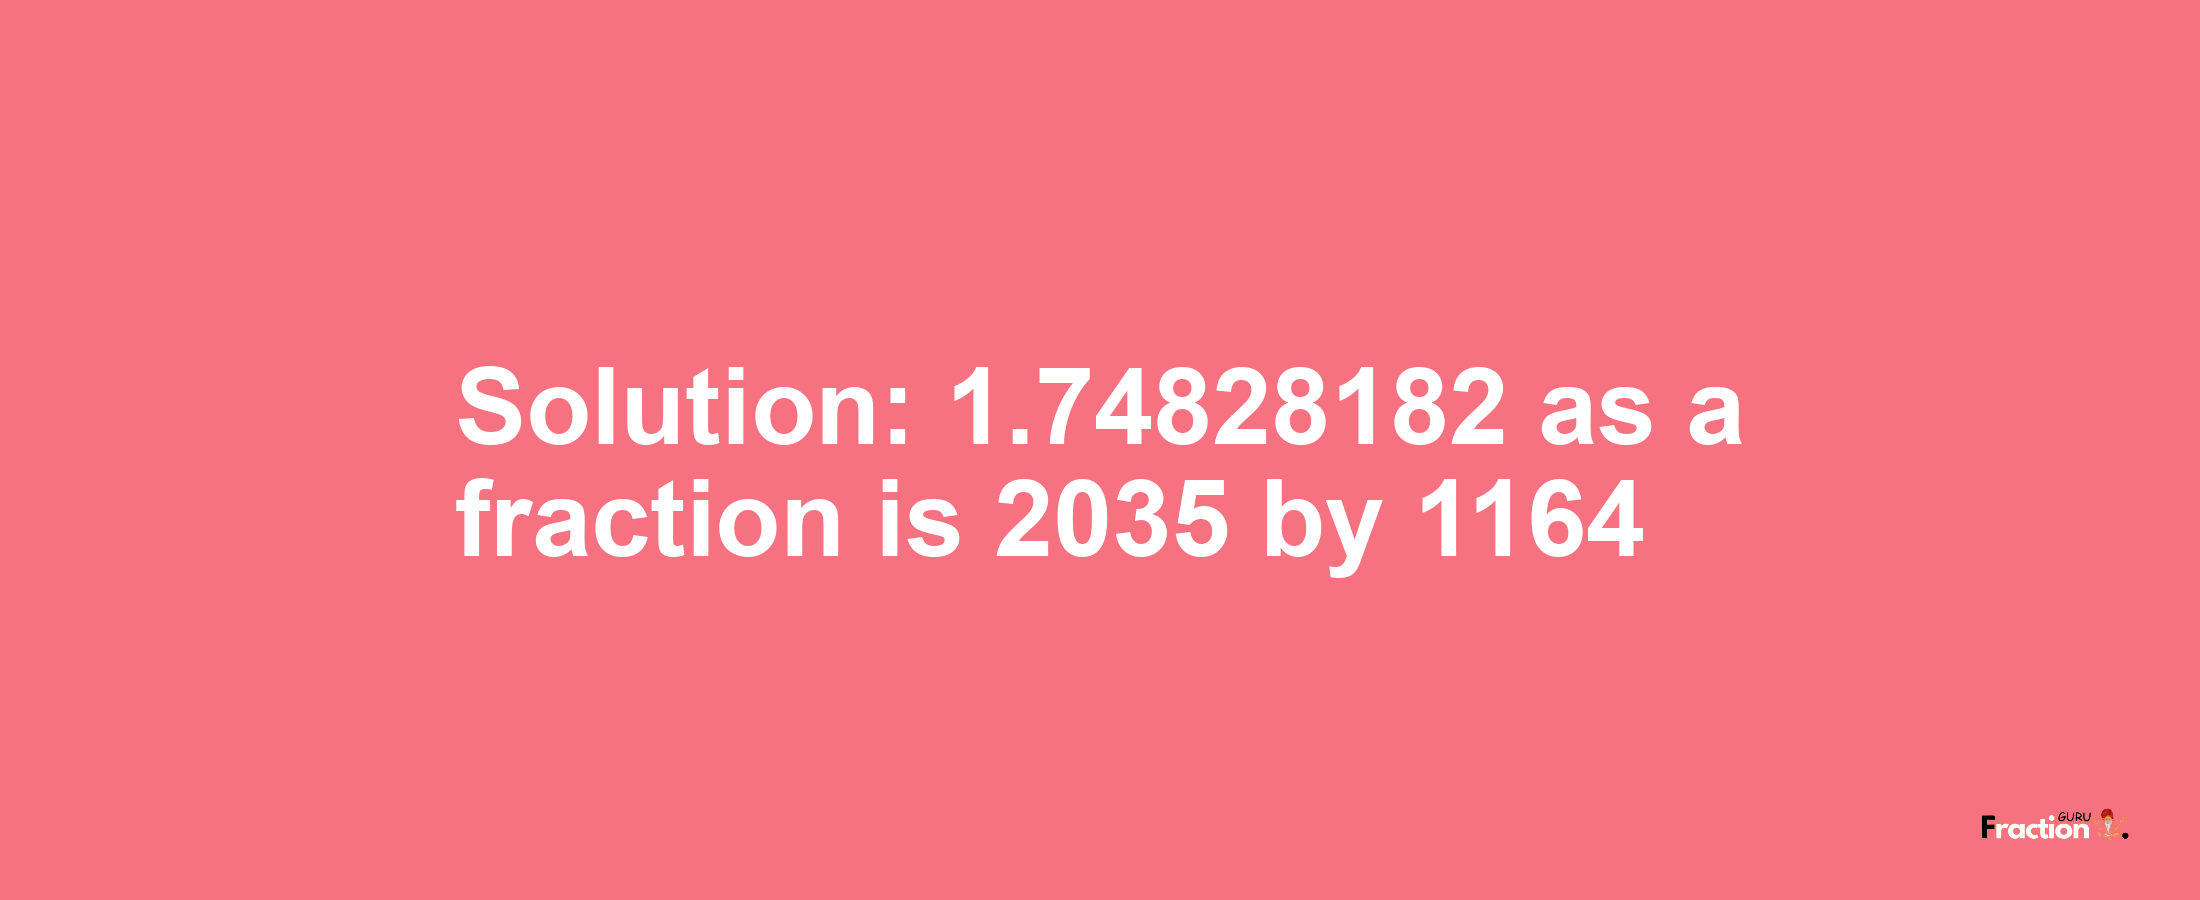 Solution:1.74828182 as a fraction is 2035/1164